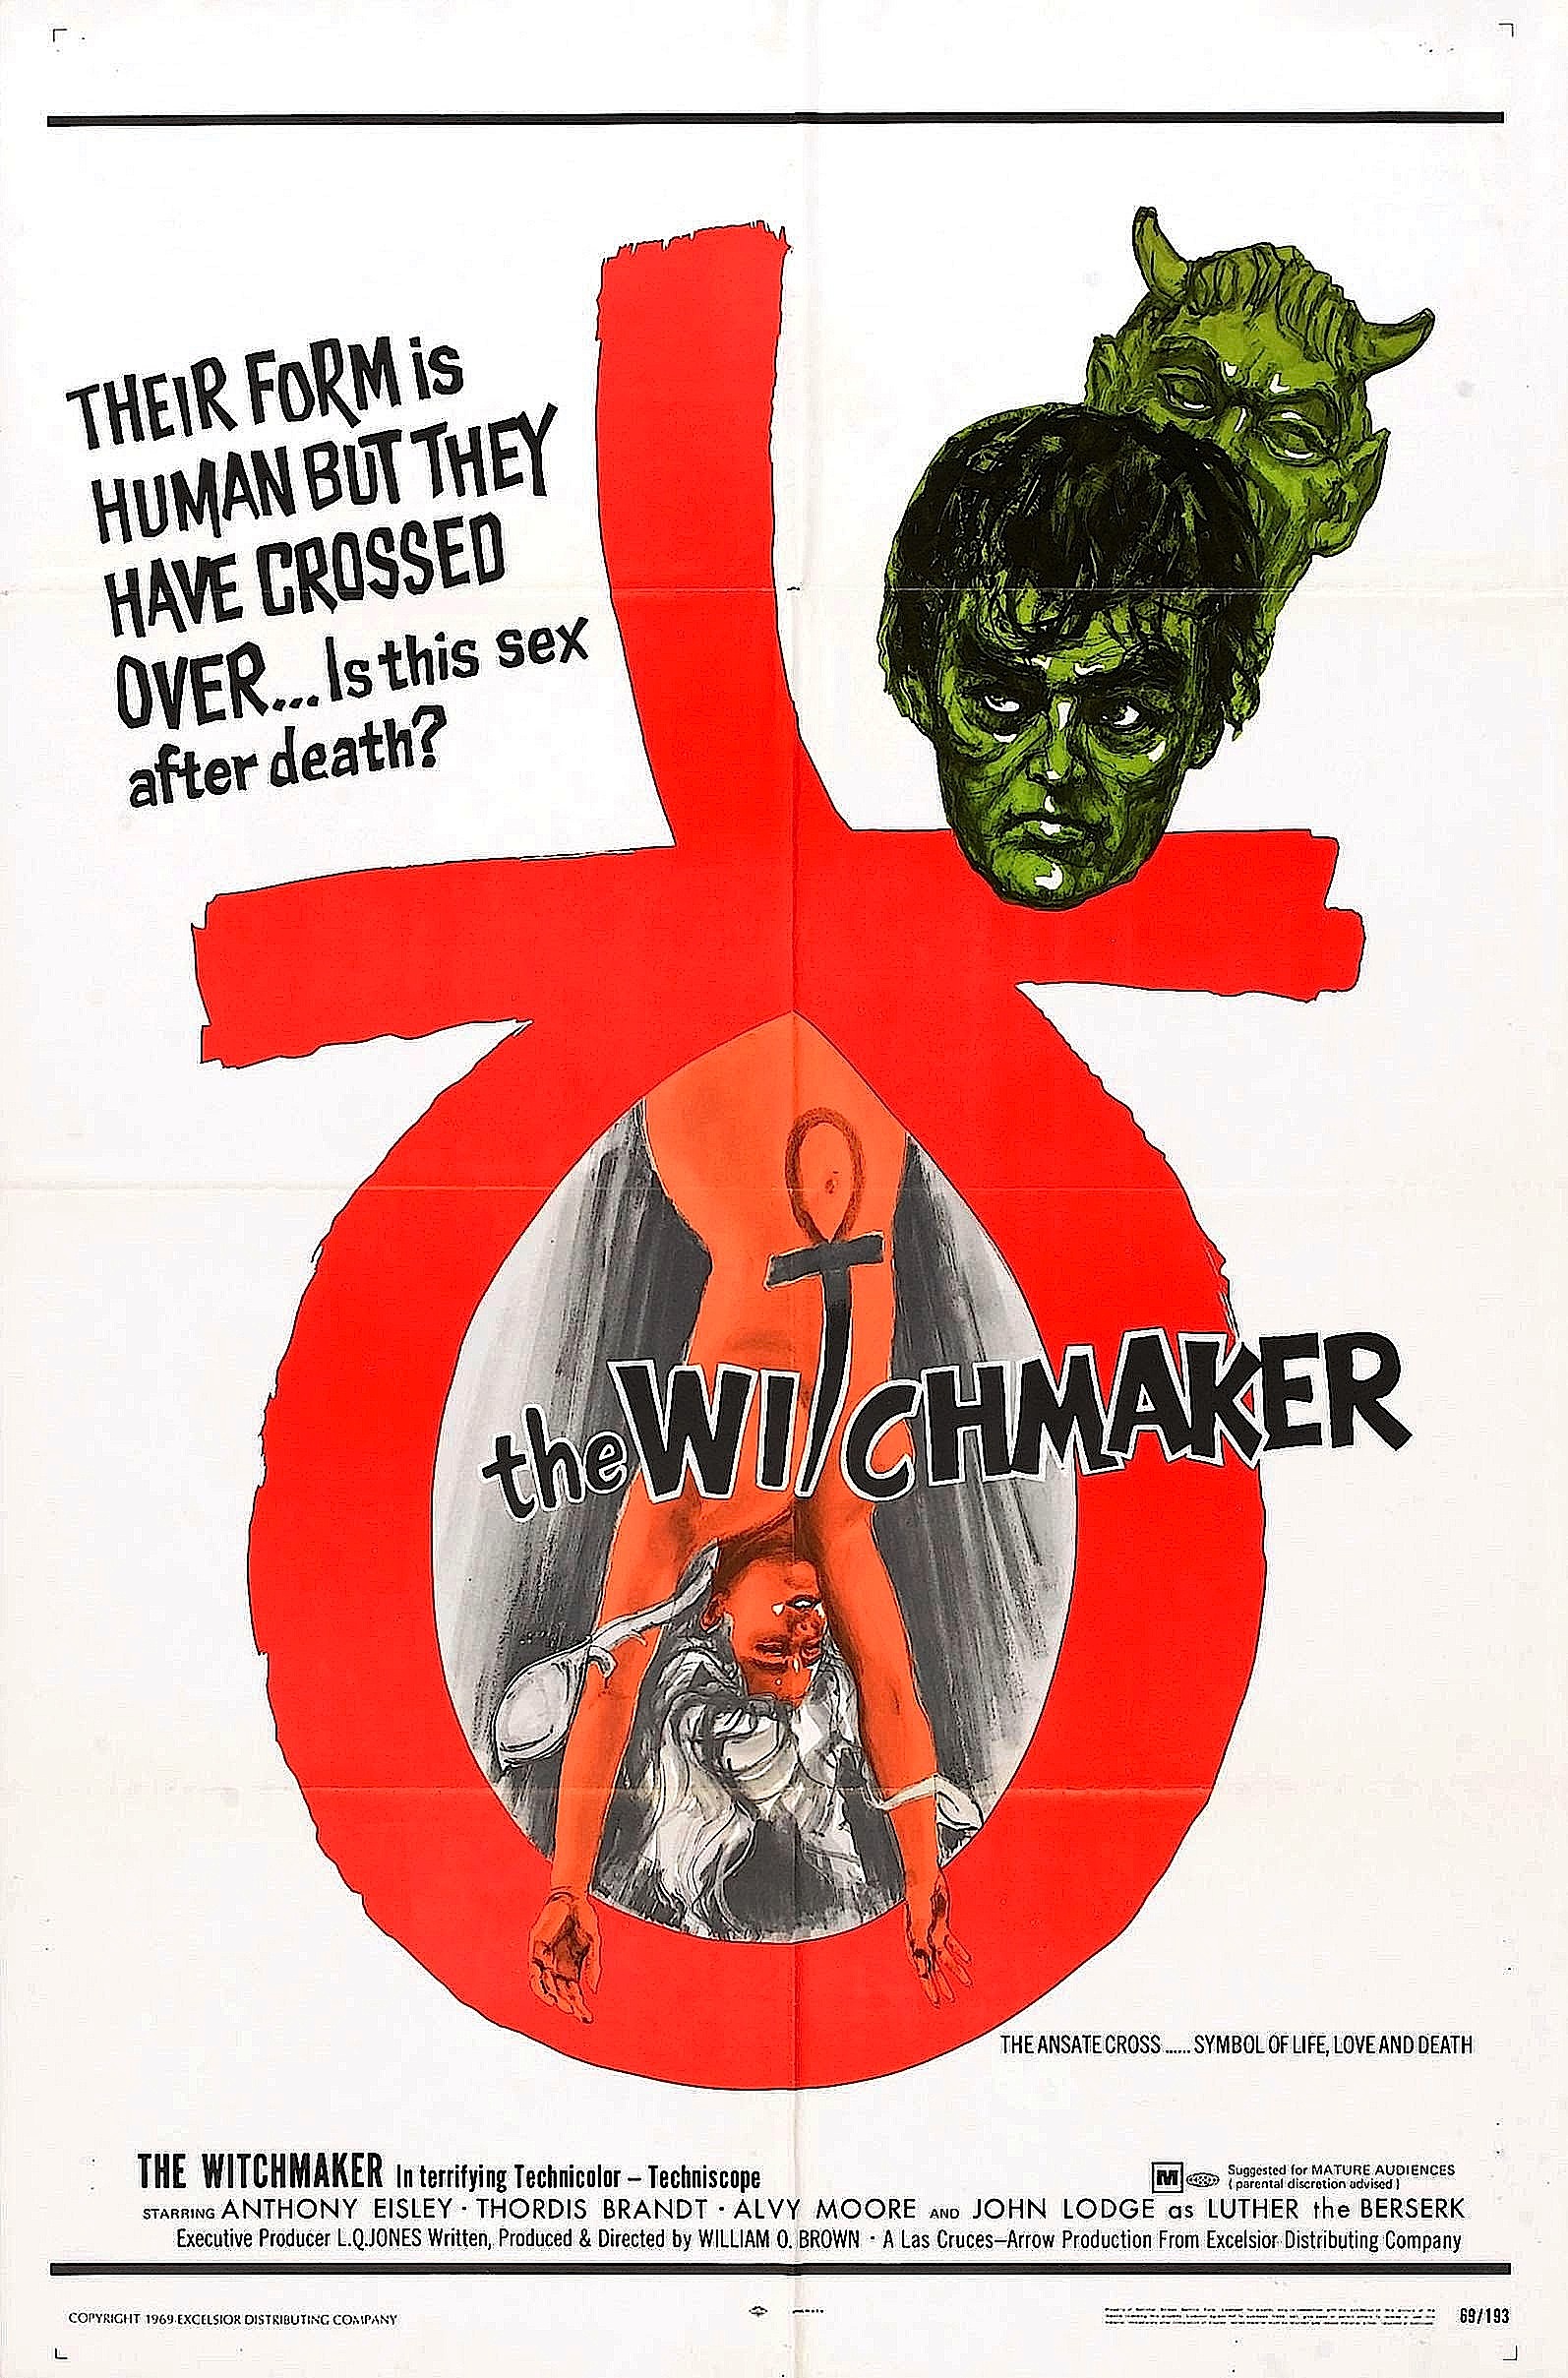 The Witchmaker (1969) Screenshot 5 